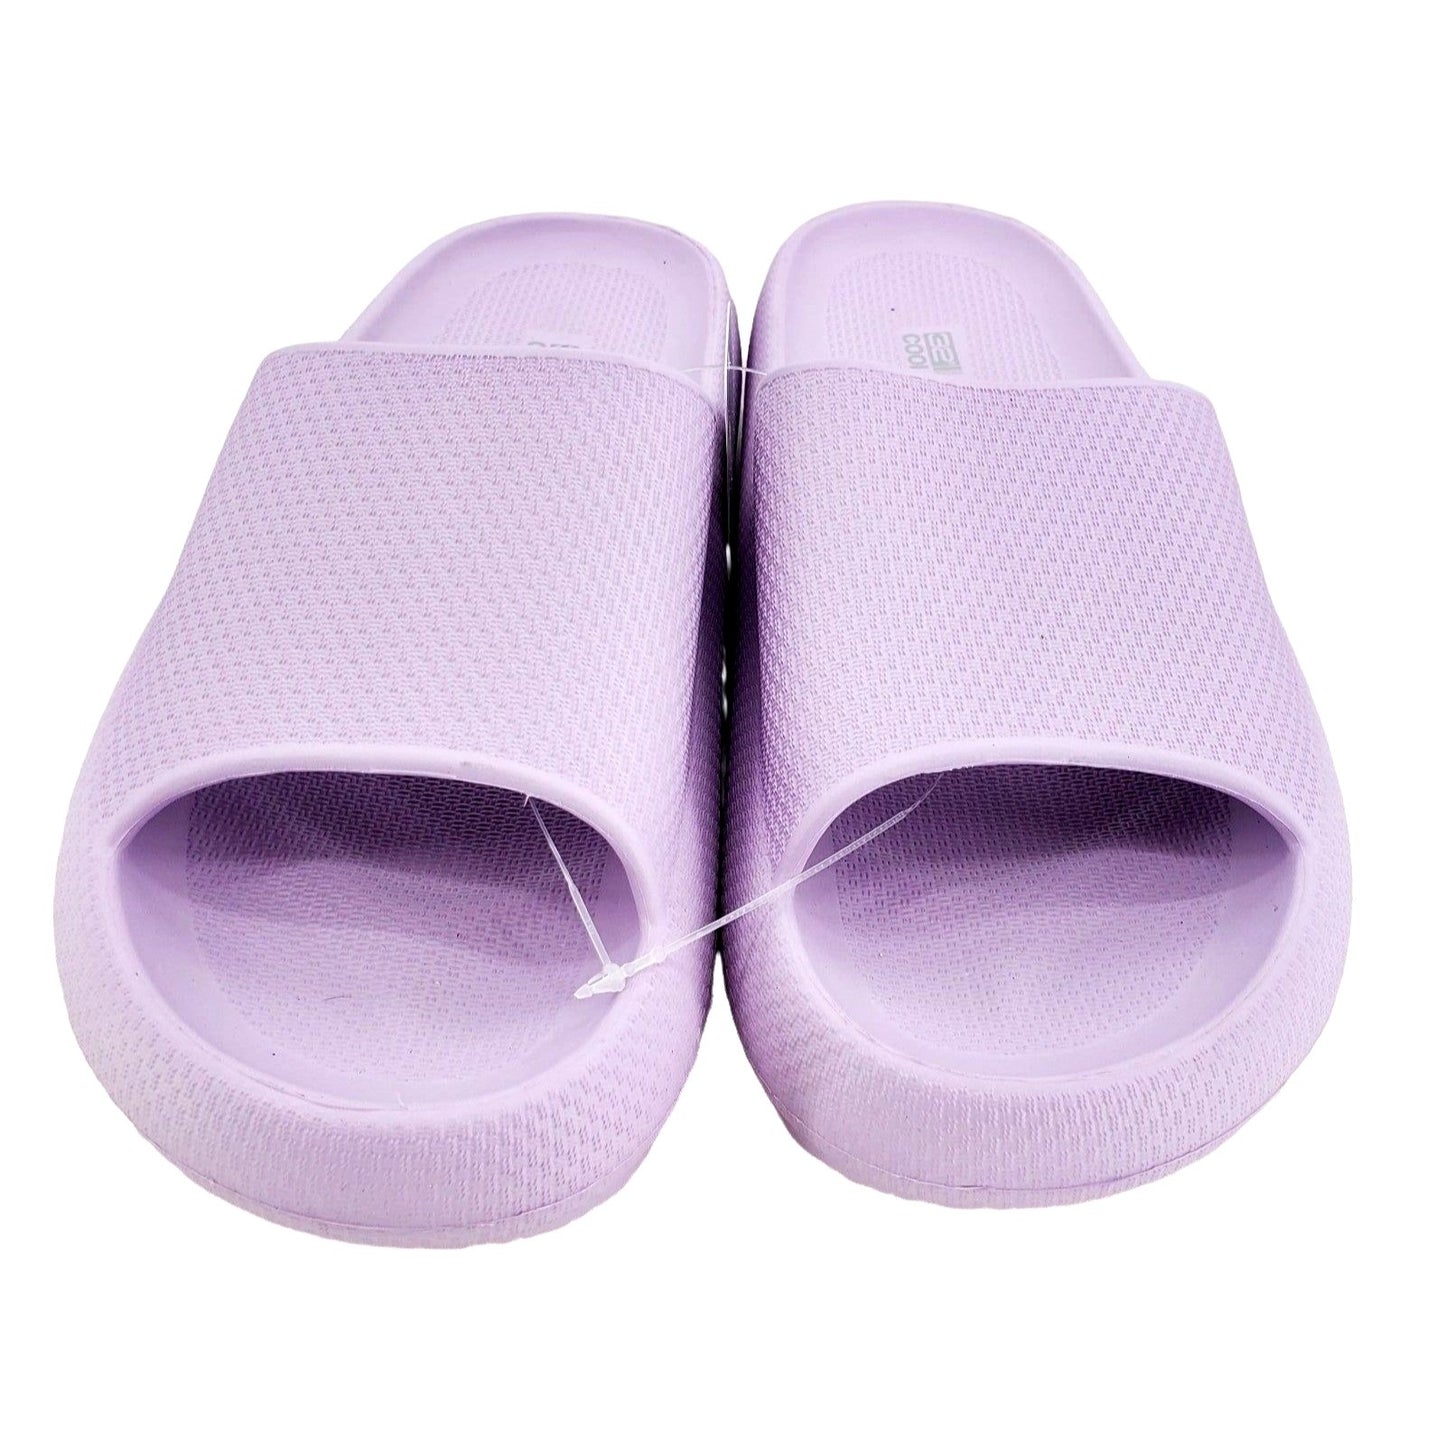 32 Degrees Cool Sandals Cushion Slide-on In/Outdoor Waterproof Shower shoes